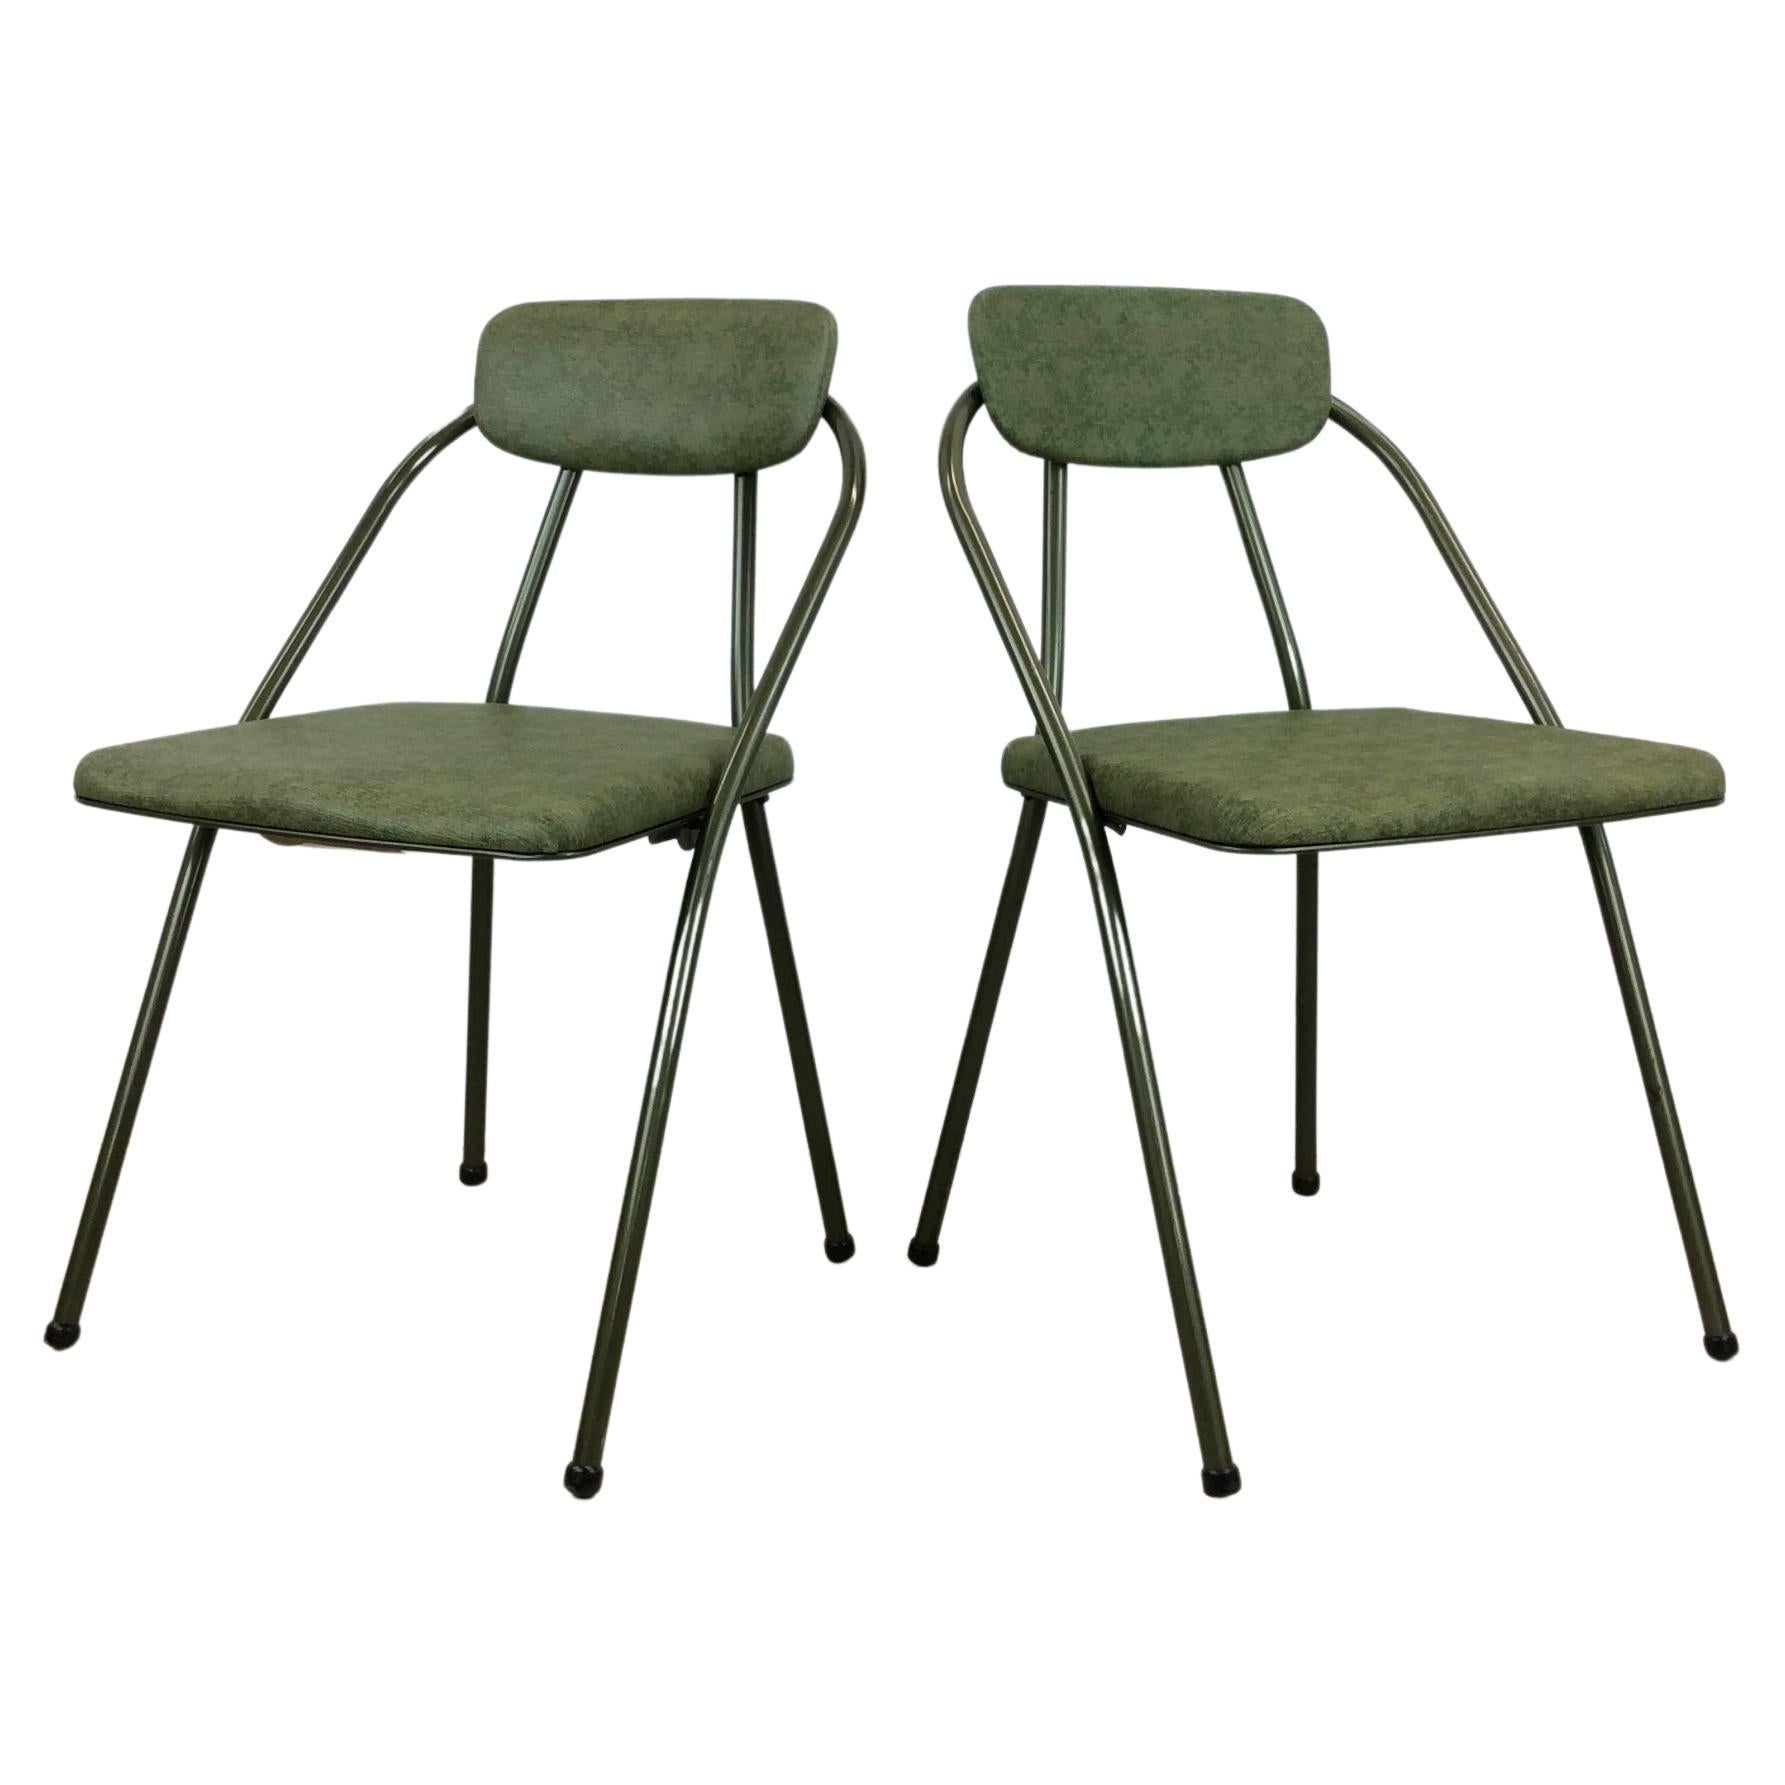 Mid Century Modern Folding Chairs with Green Vinyl by Cosco For Sale